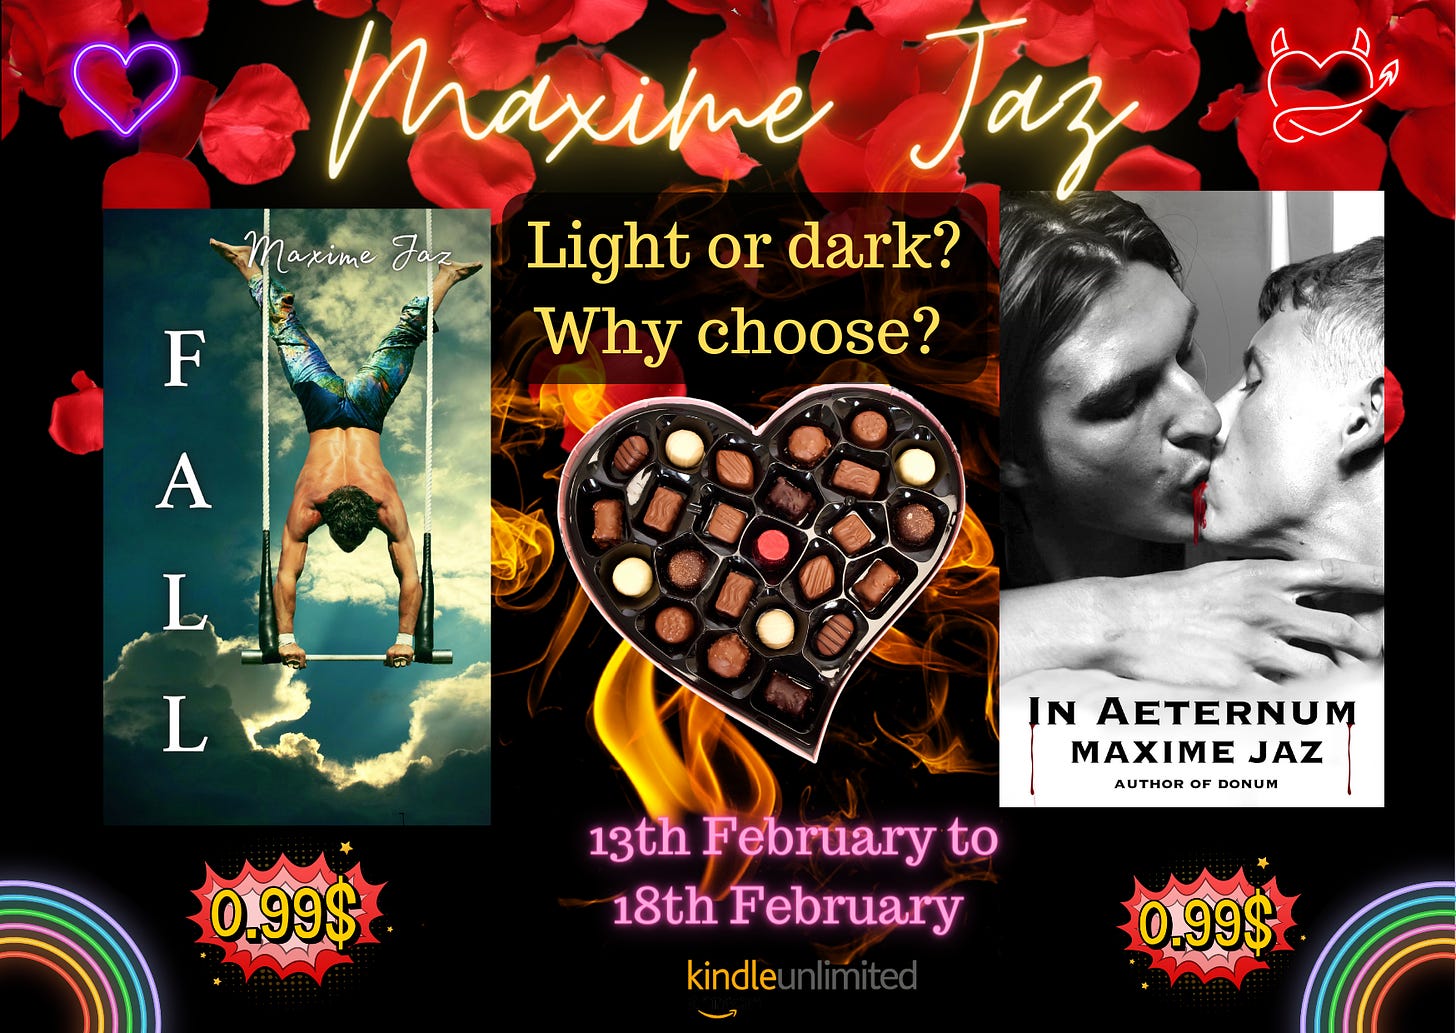 Promo pic black background with red roses falling on top. Maxime Jaz in yellow neon handwritten font a purple neon heart on the right, and a red neon devil heart on the left. Right side cover of Fall, an acrobat doing a handstand on a trapeze stand, half-naked, in colorful pants on a cloudy sky background. Middle yellow text Light or dark? Why choose? a heart-shaped box of chocolates. neon pink text 13th February to 18th February. On the left cover of In Aeternum, in greyscale, two men kissing, blood between their lips. Price tags under the books 0.99 USD. KU logo at the bottom. Bottom corners have neon rainbows. 